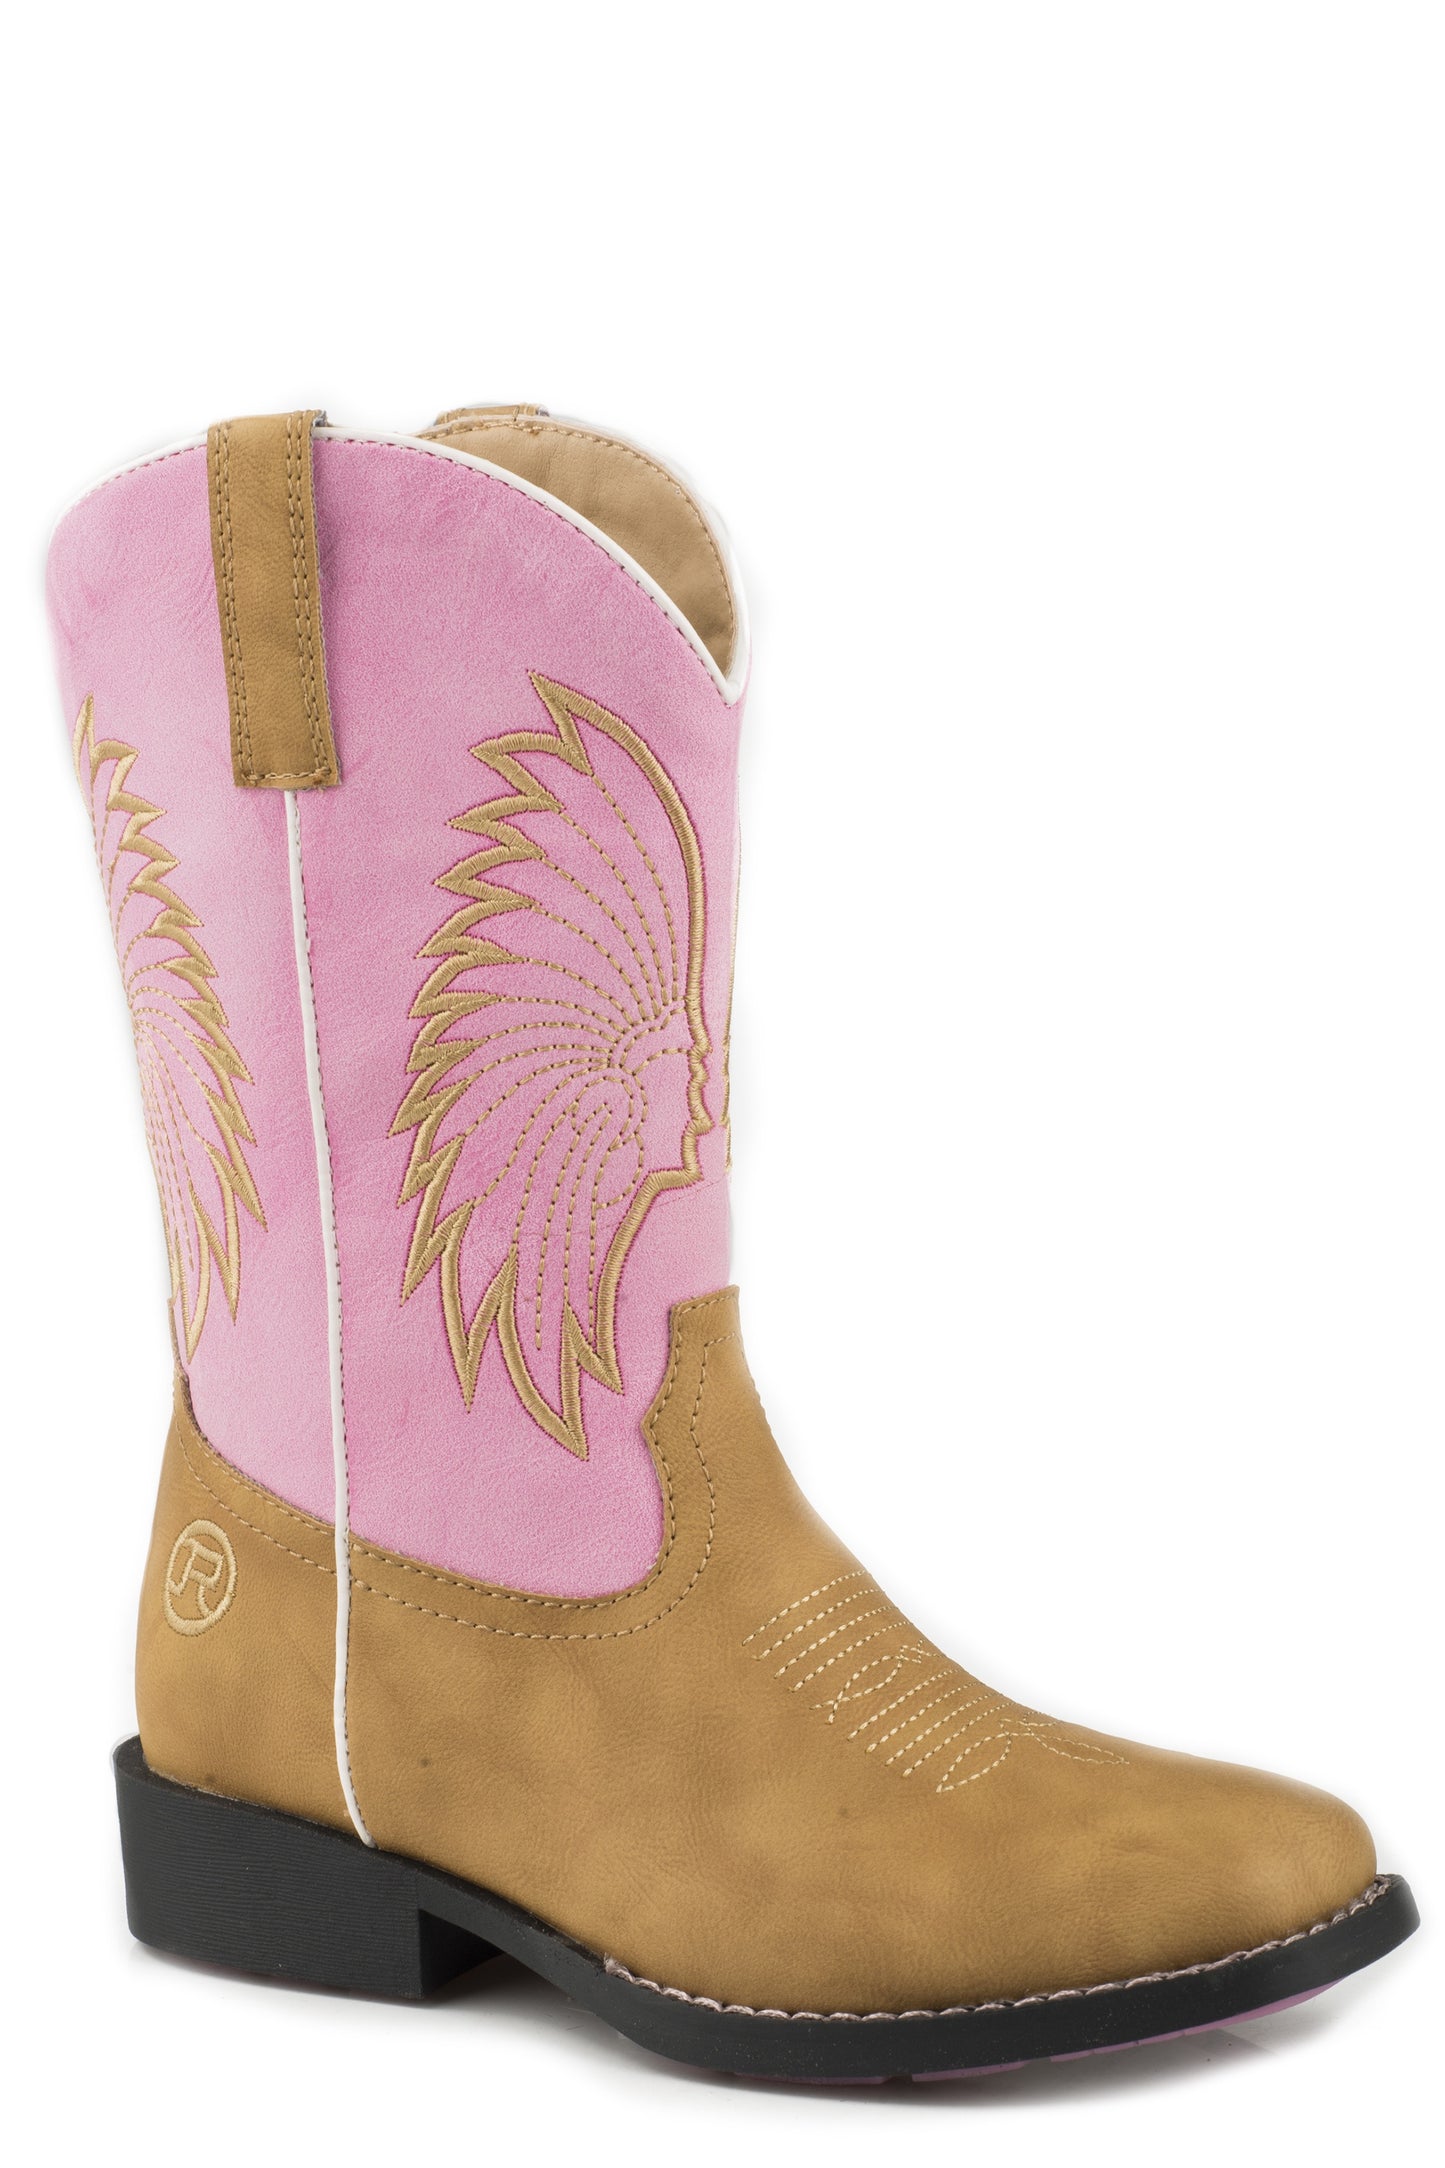 Toddler's Roper Big Chief Boots Pink